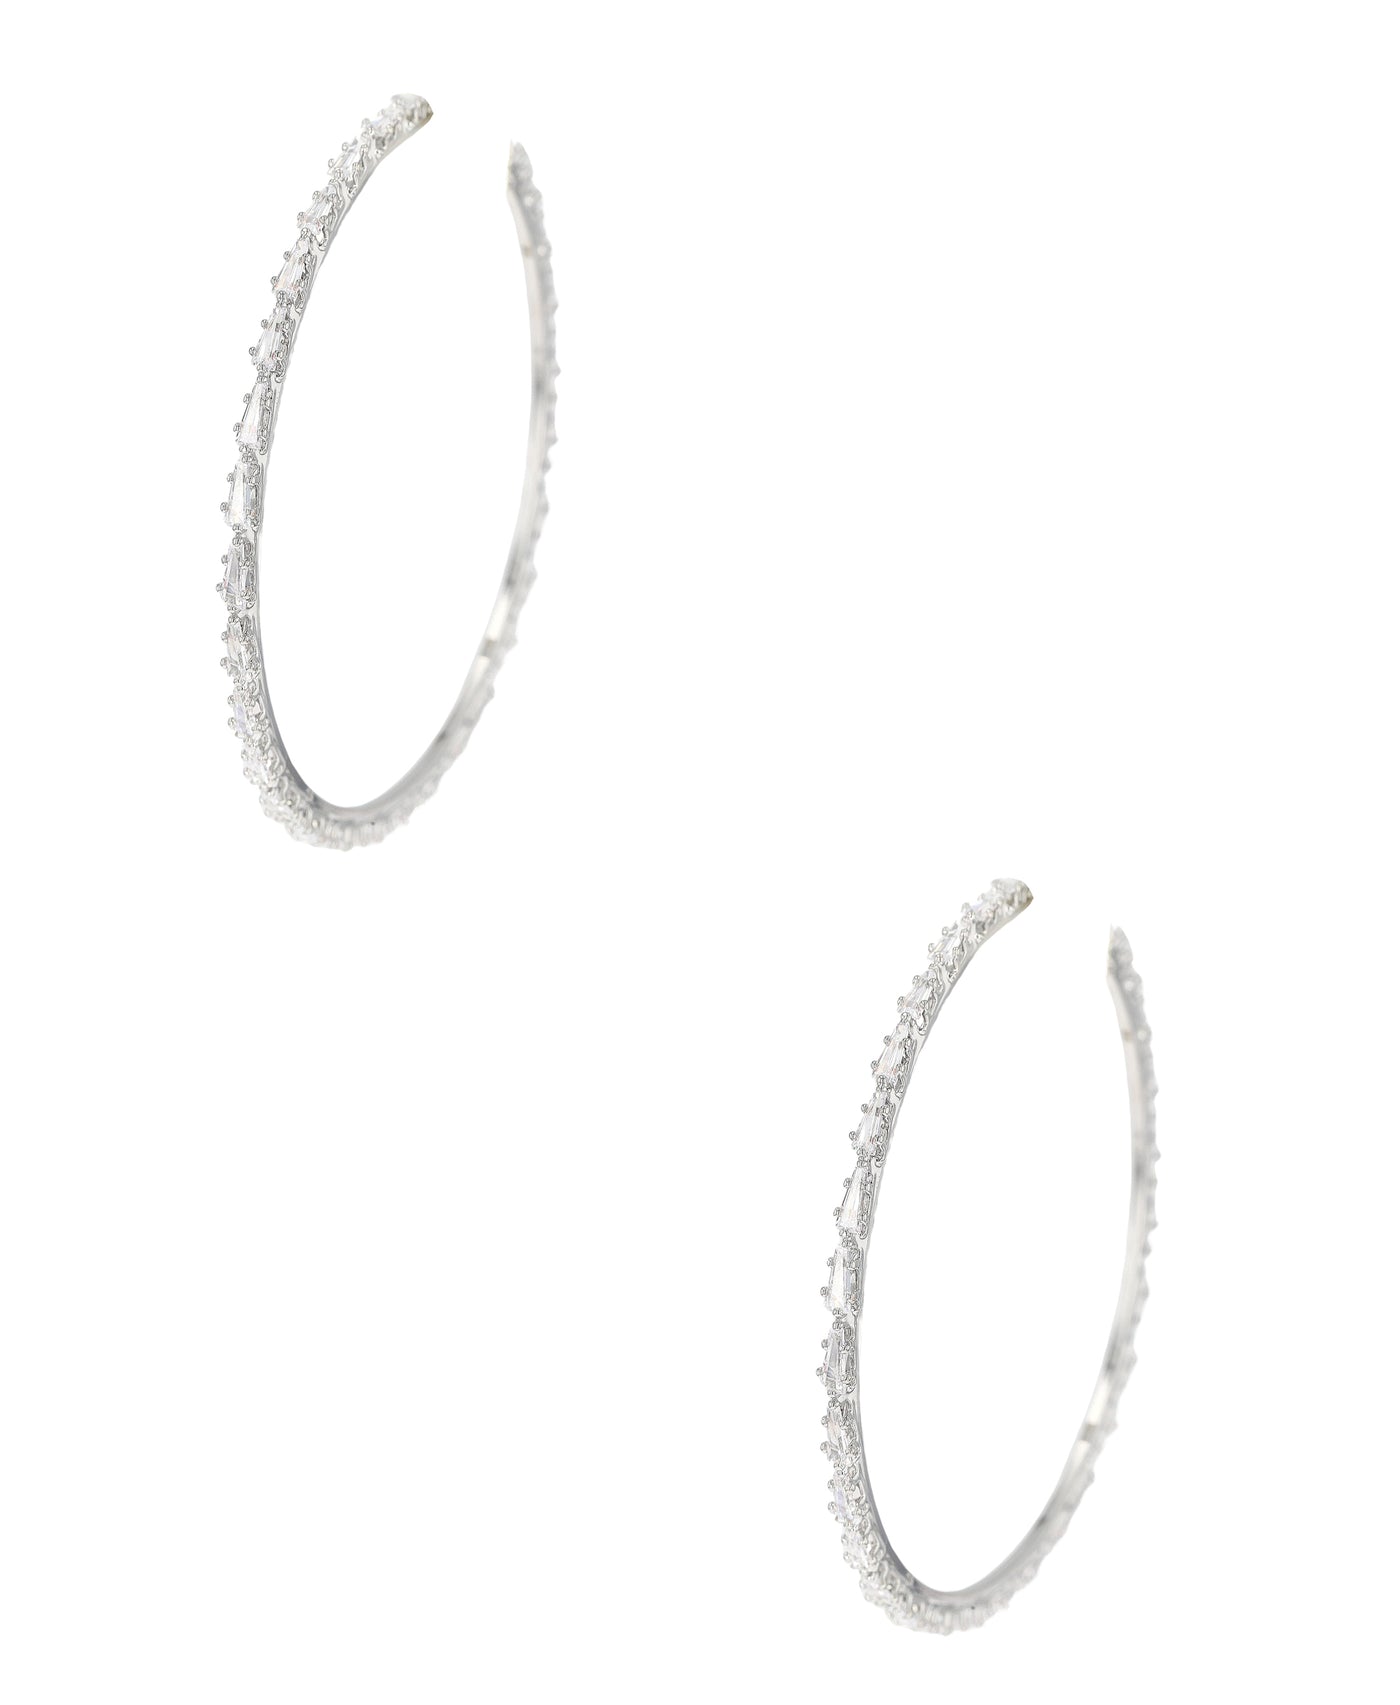 Large Hoop Earrings w/ CZ Accent image 1